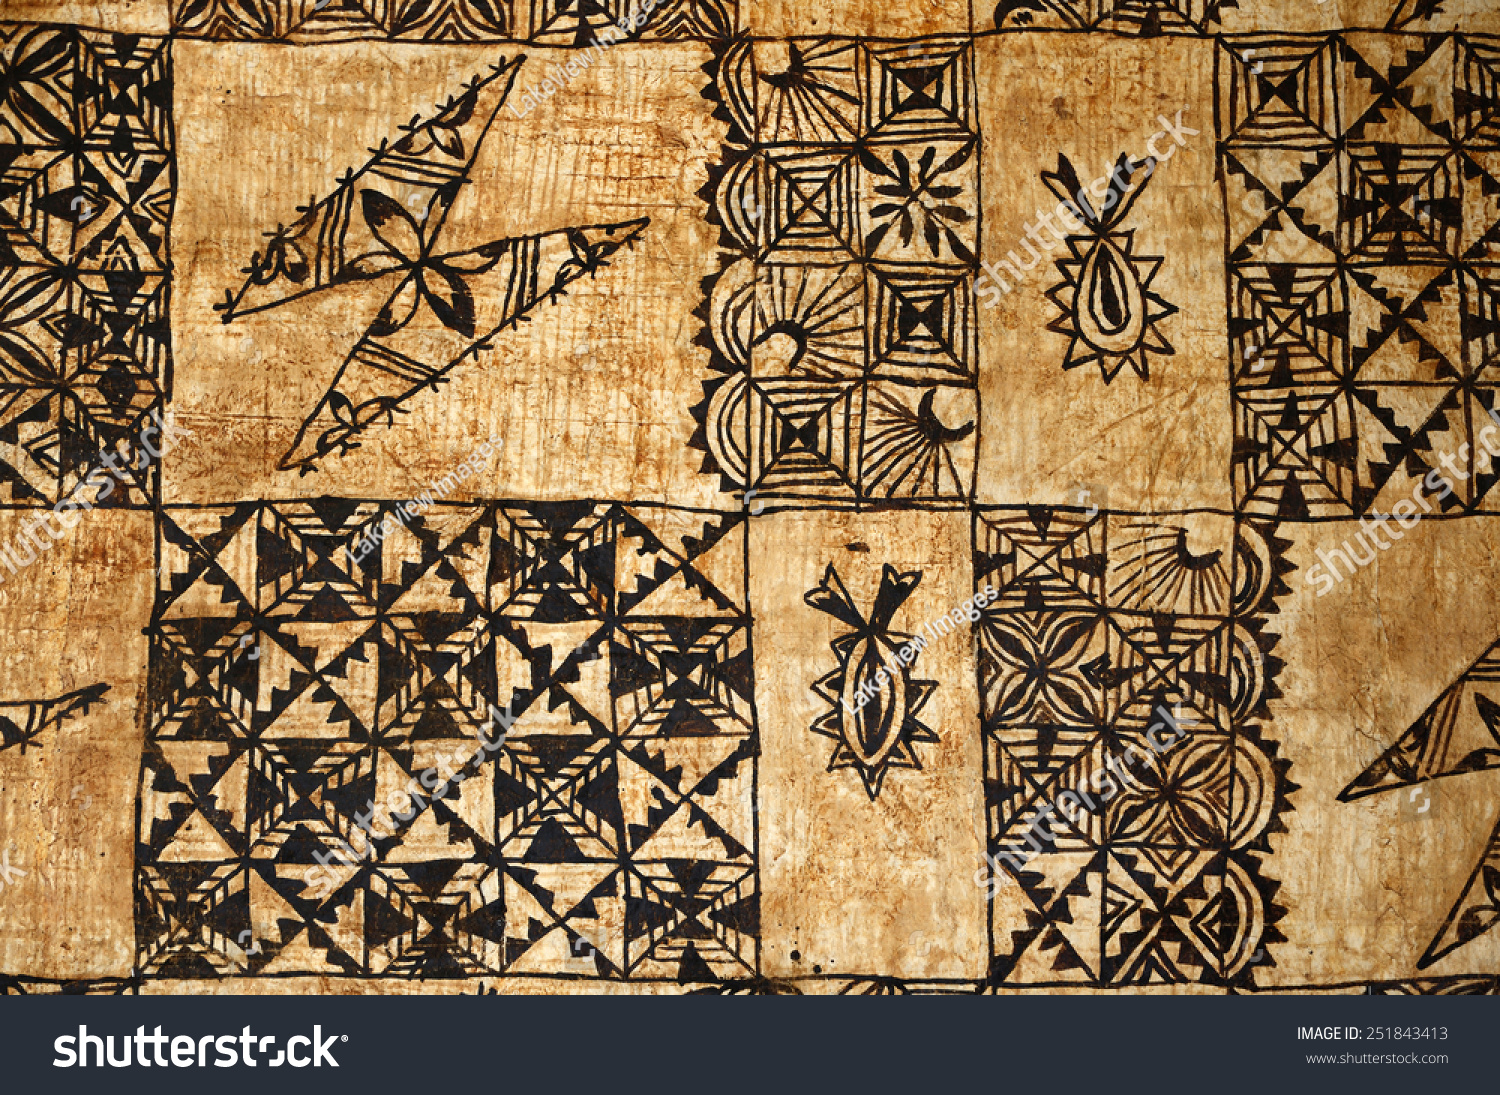 Background Of Traditional Pacific Island Tapa Cloth A